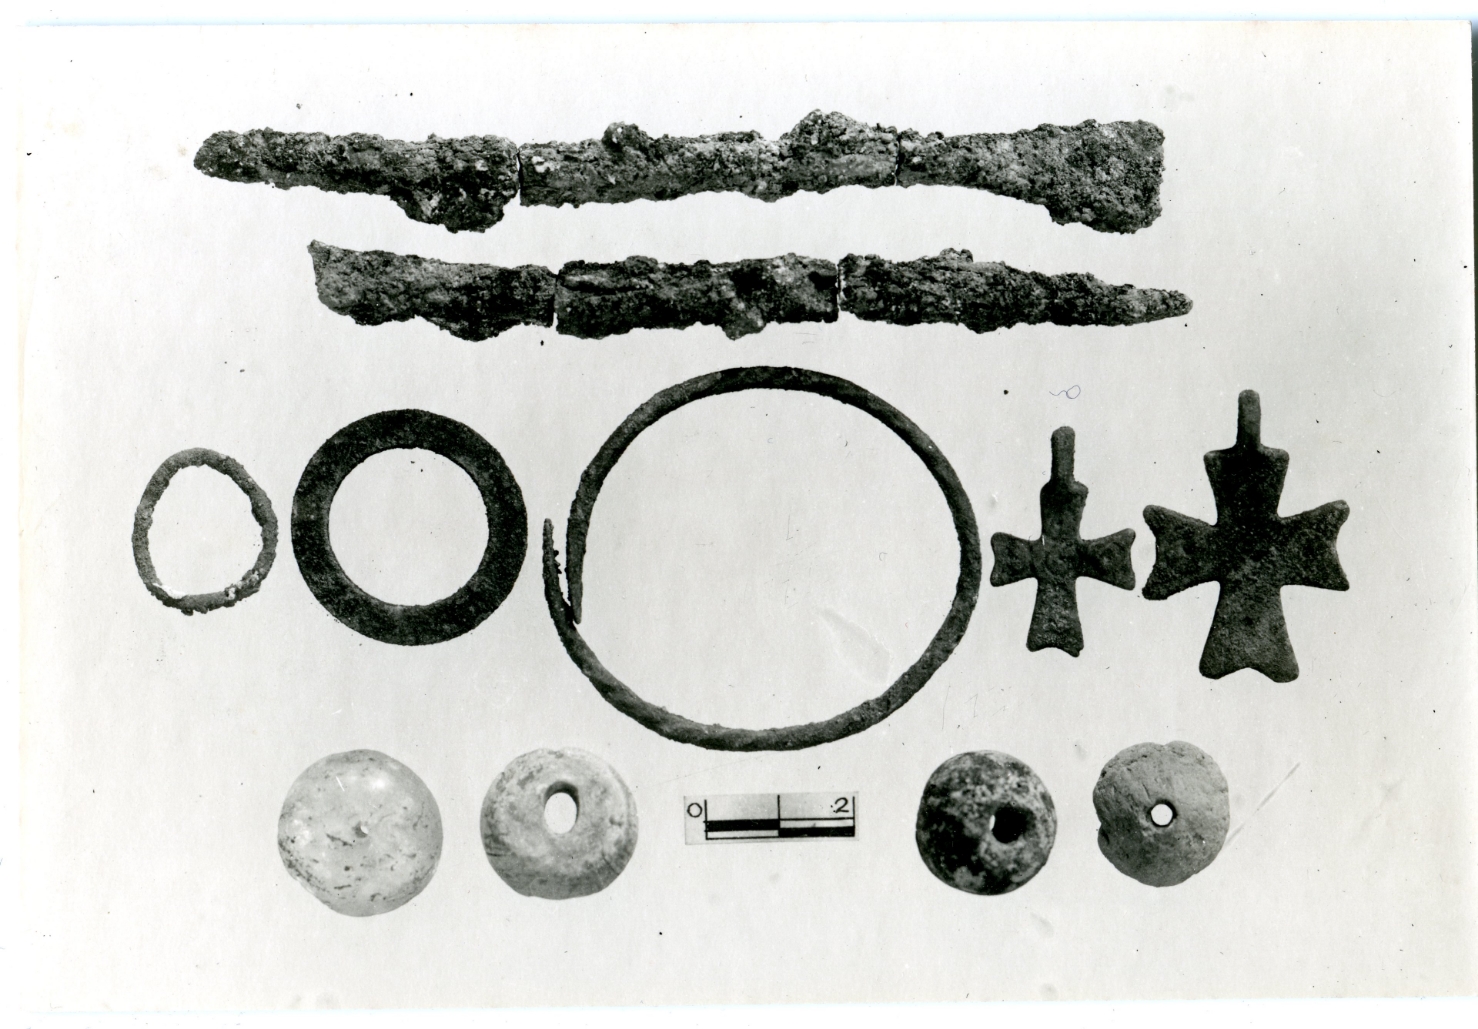 Finds, including beads, pendants and bracelets, from the burial in Room K of the Monastery.